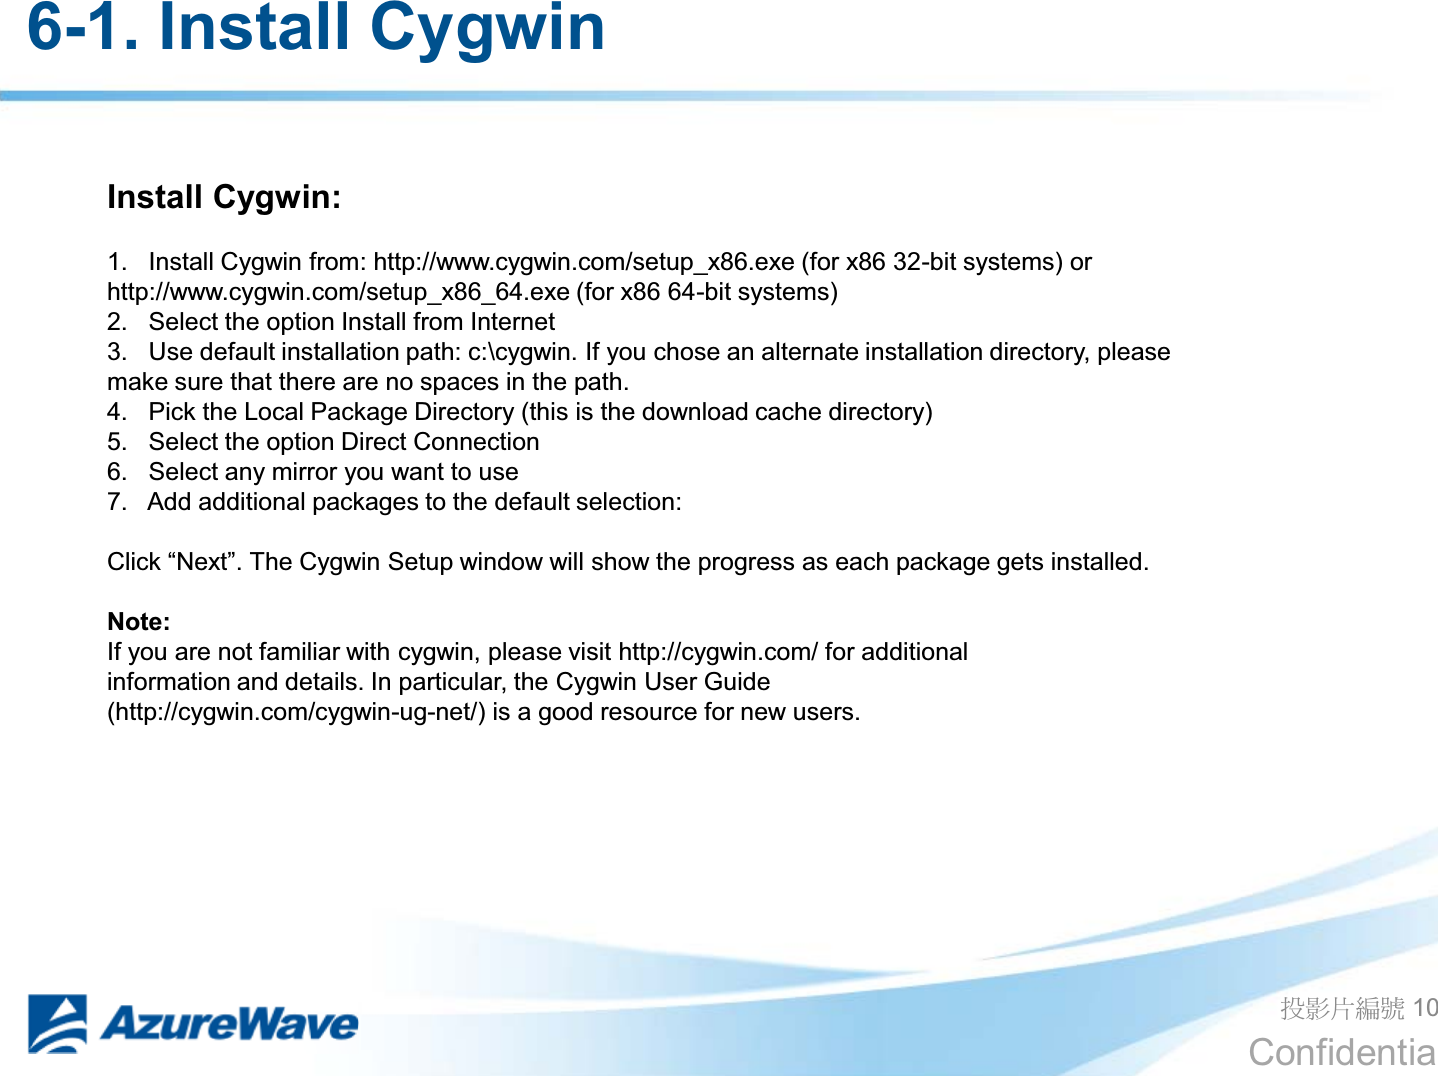 Confidential 6-1. Install Cygwin ދᐙׂᒳᇆ 10 Install Cygwin:  1.   Install Cygwin from: http://www.cygwin.com/setup_x86.exe (for x86 32-bit systems) or http://www.cygwin.com/setup_x86_64.exe (for x86 64-bit systems) 2.   Select the option Install from Internet 3.   Use default installation path: c:\cygwin. If you chose an alternate installation directory, please make sure that there are no spaces in the path. 4.   Pick the Local Package Directory (this is the download cache directory) 5.   Select the option Direct Connection 6.   Select any mirror you want to use 7.   Add additional packages to the default selection:  &amp;OLFN³1H[W´7KHCygwin Setup window will show the progress as each package gets installed.  Note: If you are not familiar with cygwin, please visit http://cygwin.com/ for additional information and details. In particular, the Cygwin User Guide (http://cygwin.com/cygwin-ug-net/) is a good resource for new users.  